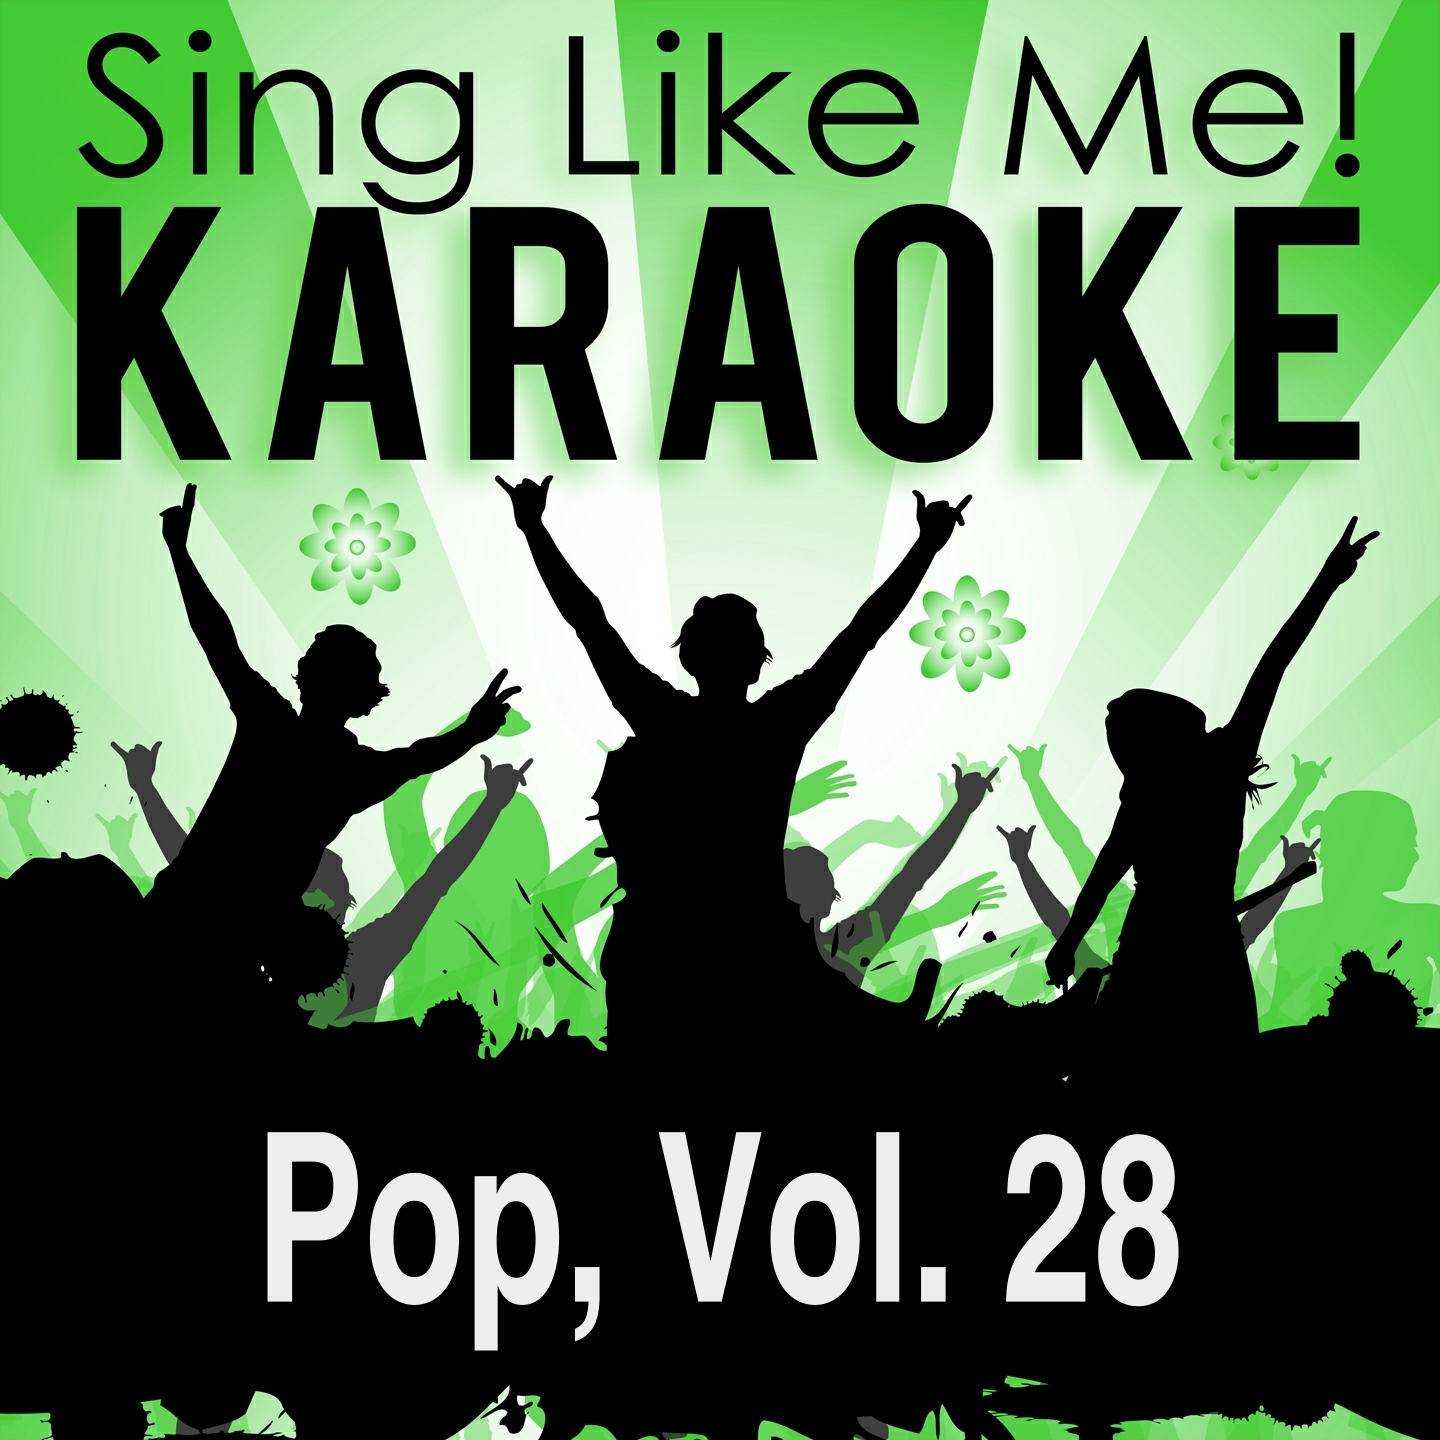 Walk (Karaoke Version With Guide Melody) (Originally Performed By Foo Fighters)